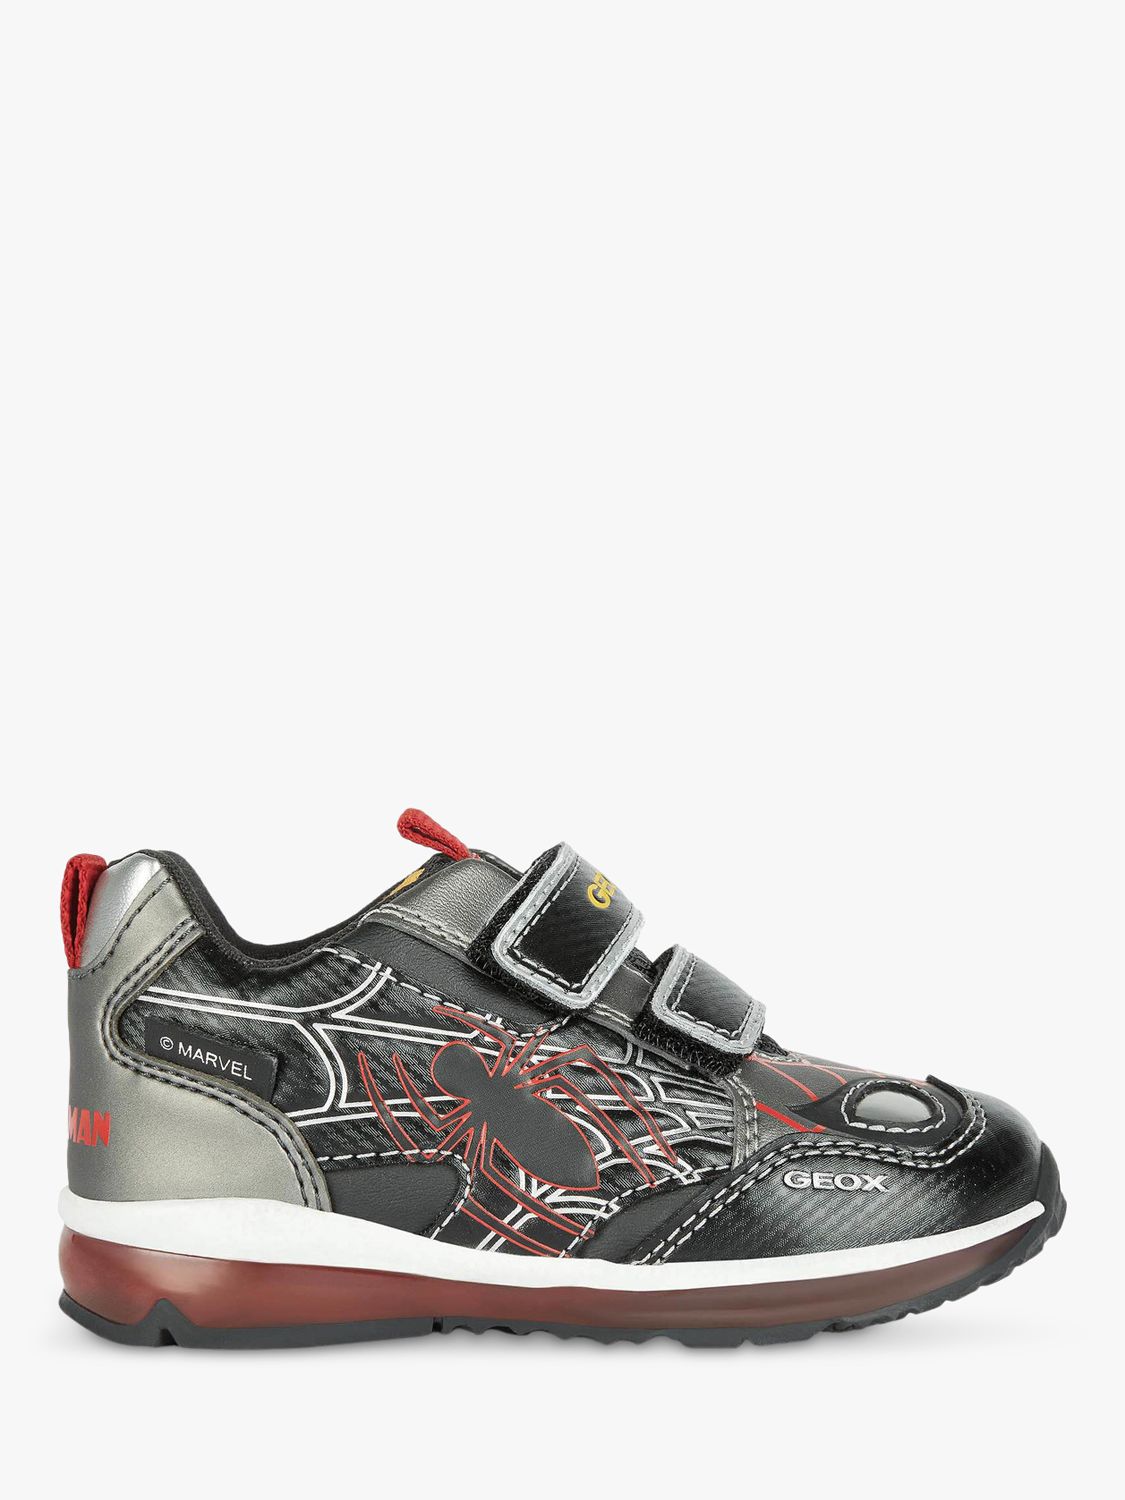 banda Pronombre Peave Geox Kids' Todo Spider-Man Light-Up Trainers, Black at John Lewis & Partners